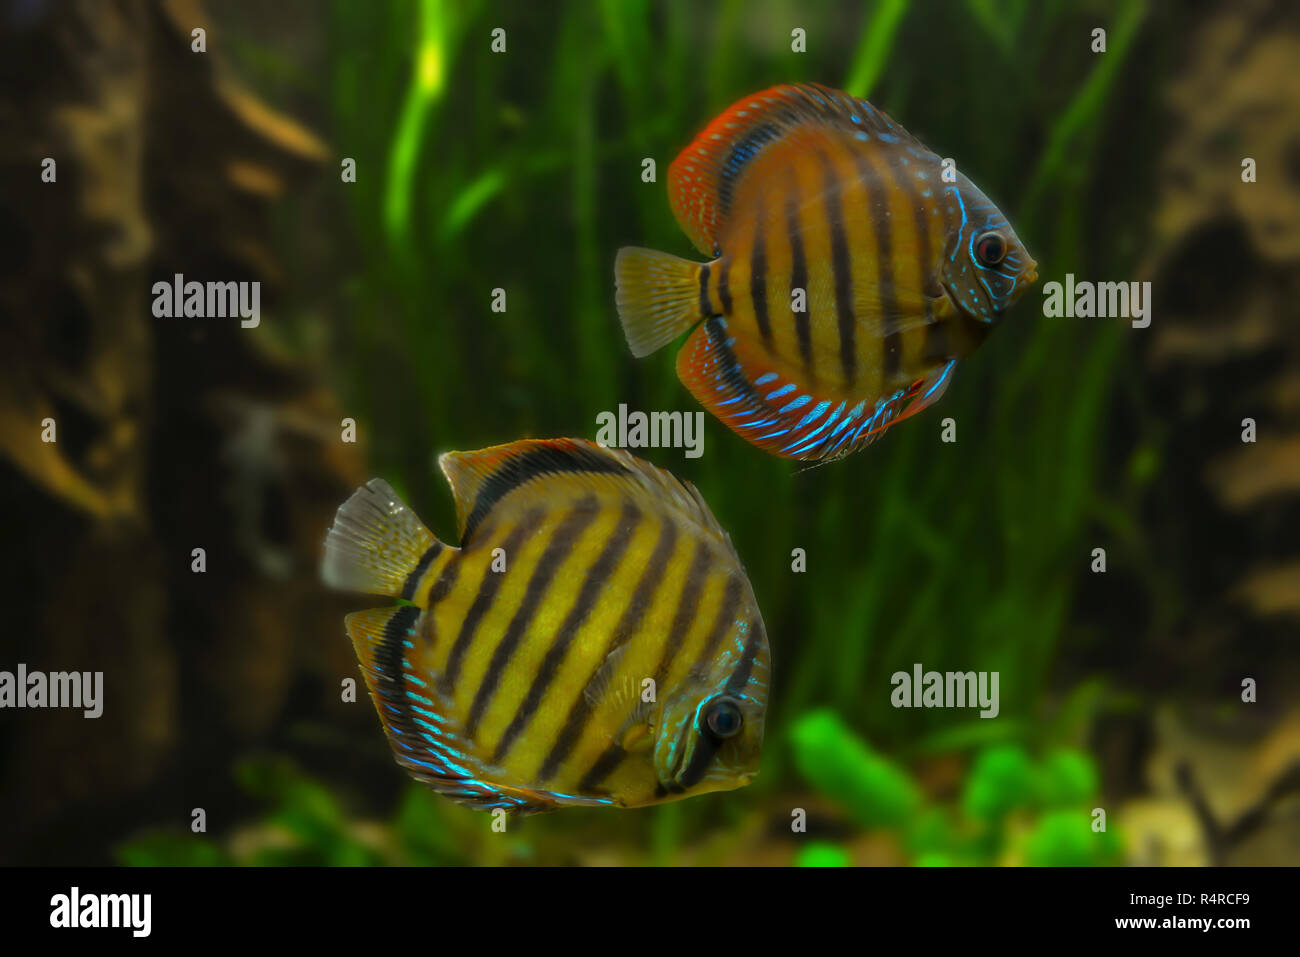 colorful discus fish Stock Photo